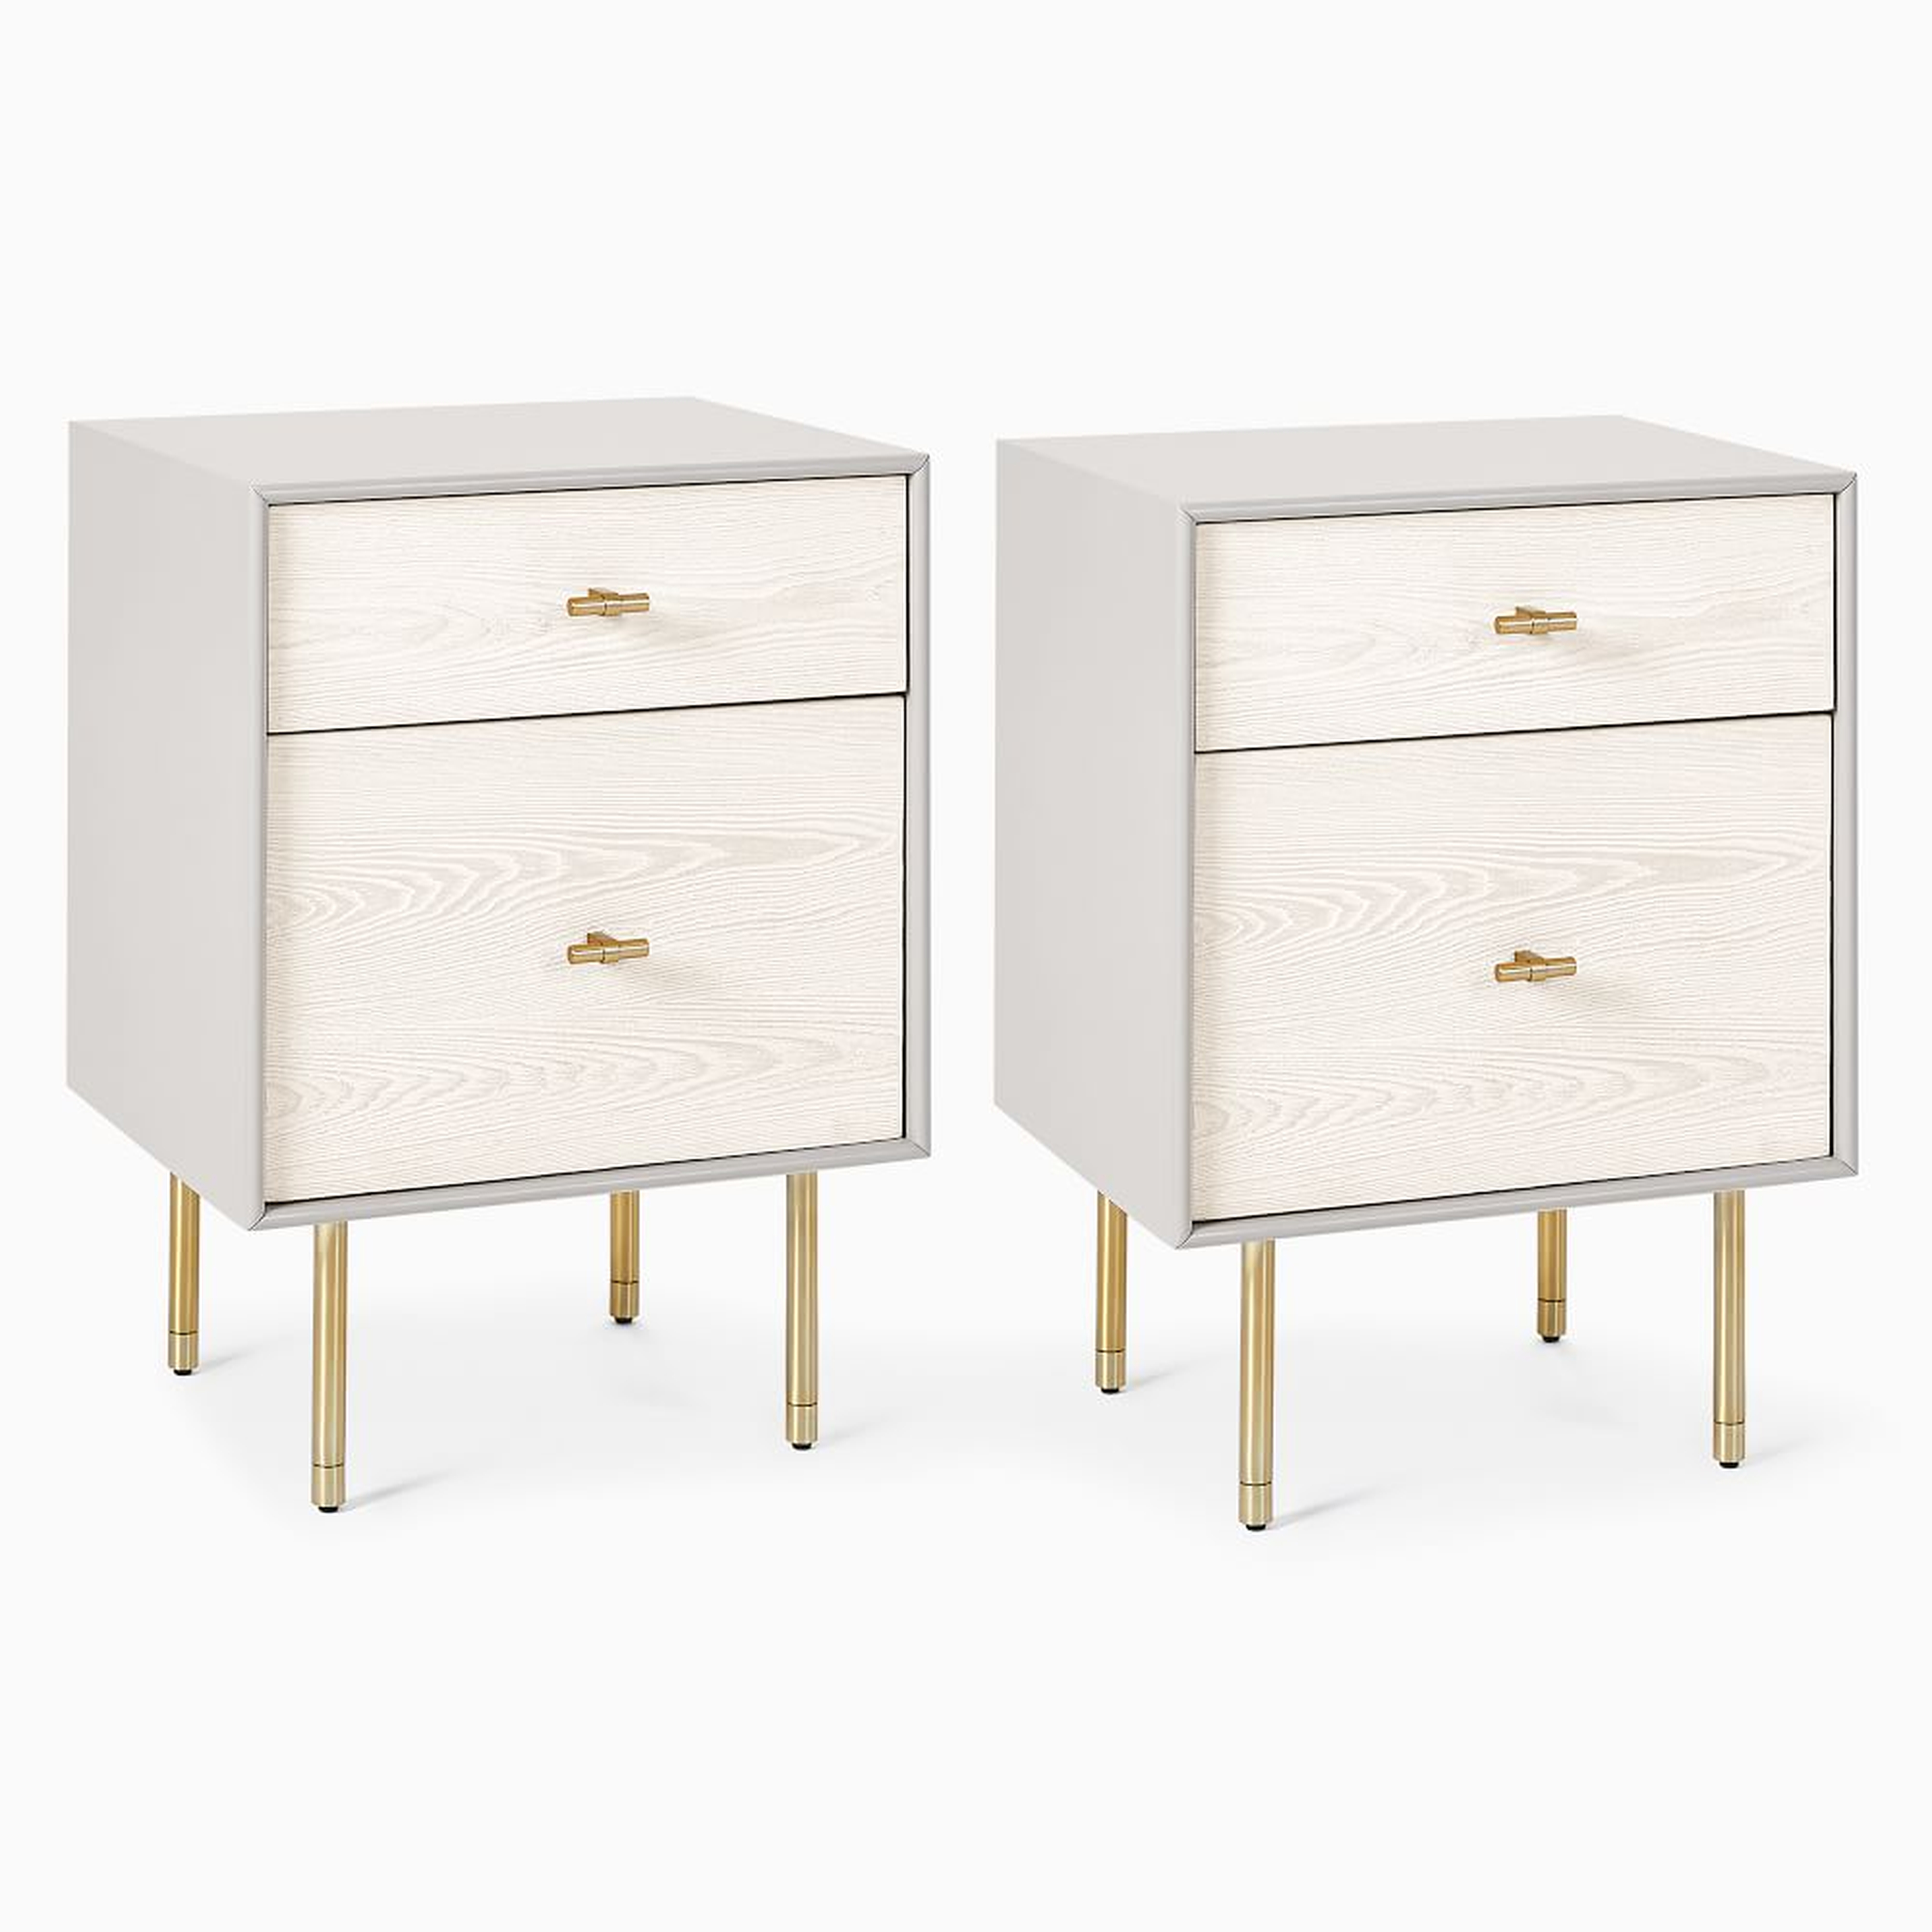 Modernist (21") Wood + Lacquer Nightstand, Winter Wood, Set of 2 - West Elm